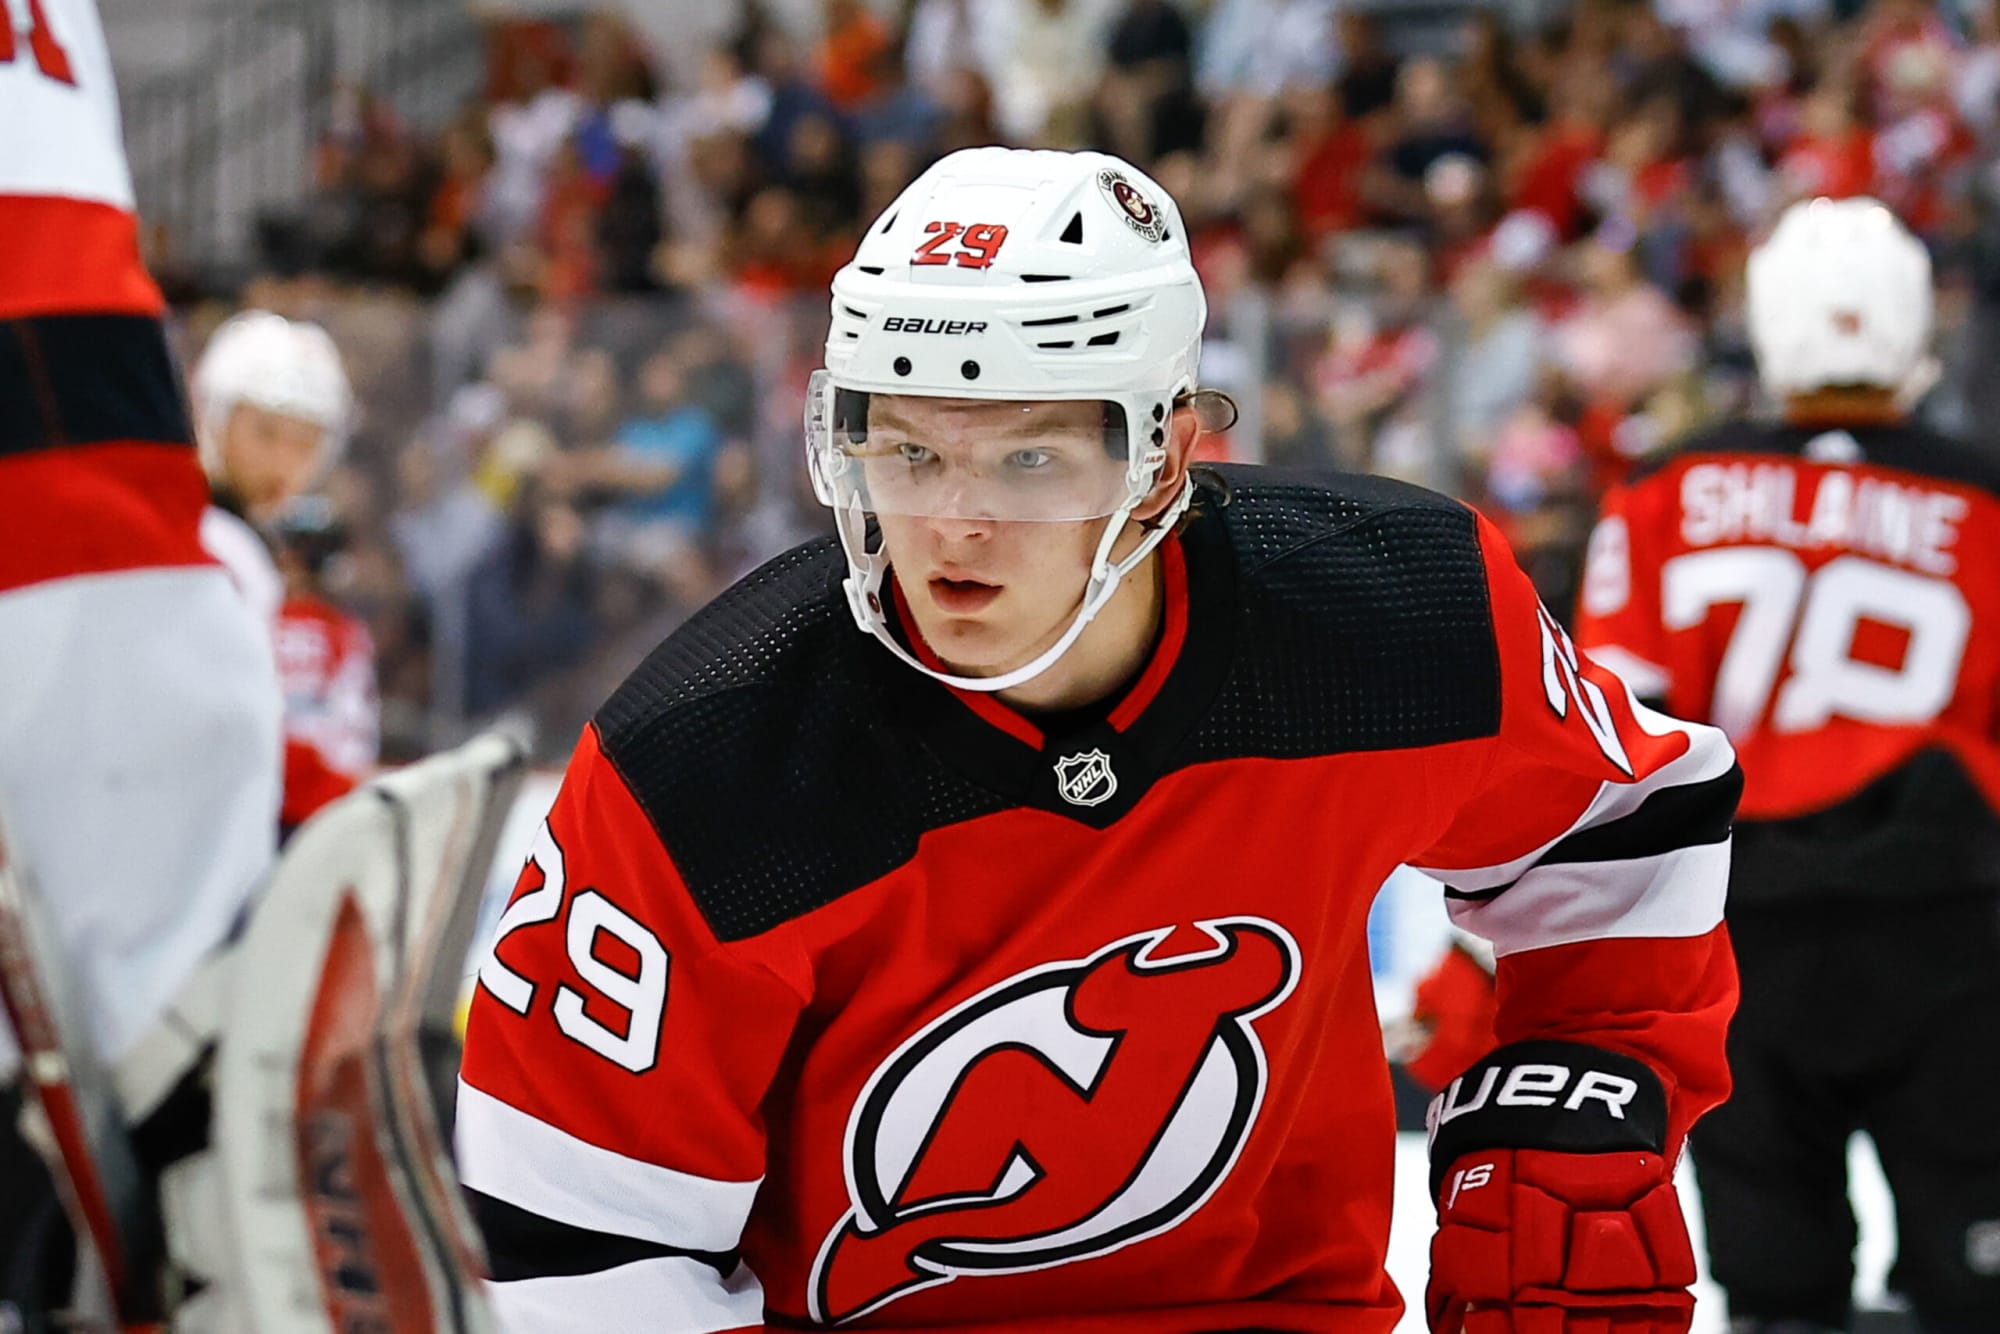 Vinnie Parise on X: New Jersey Devils rookie camp is over. I